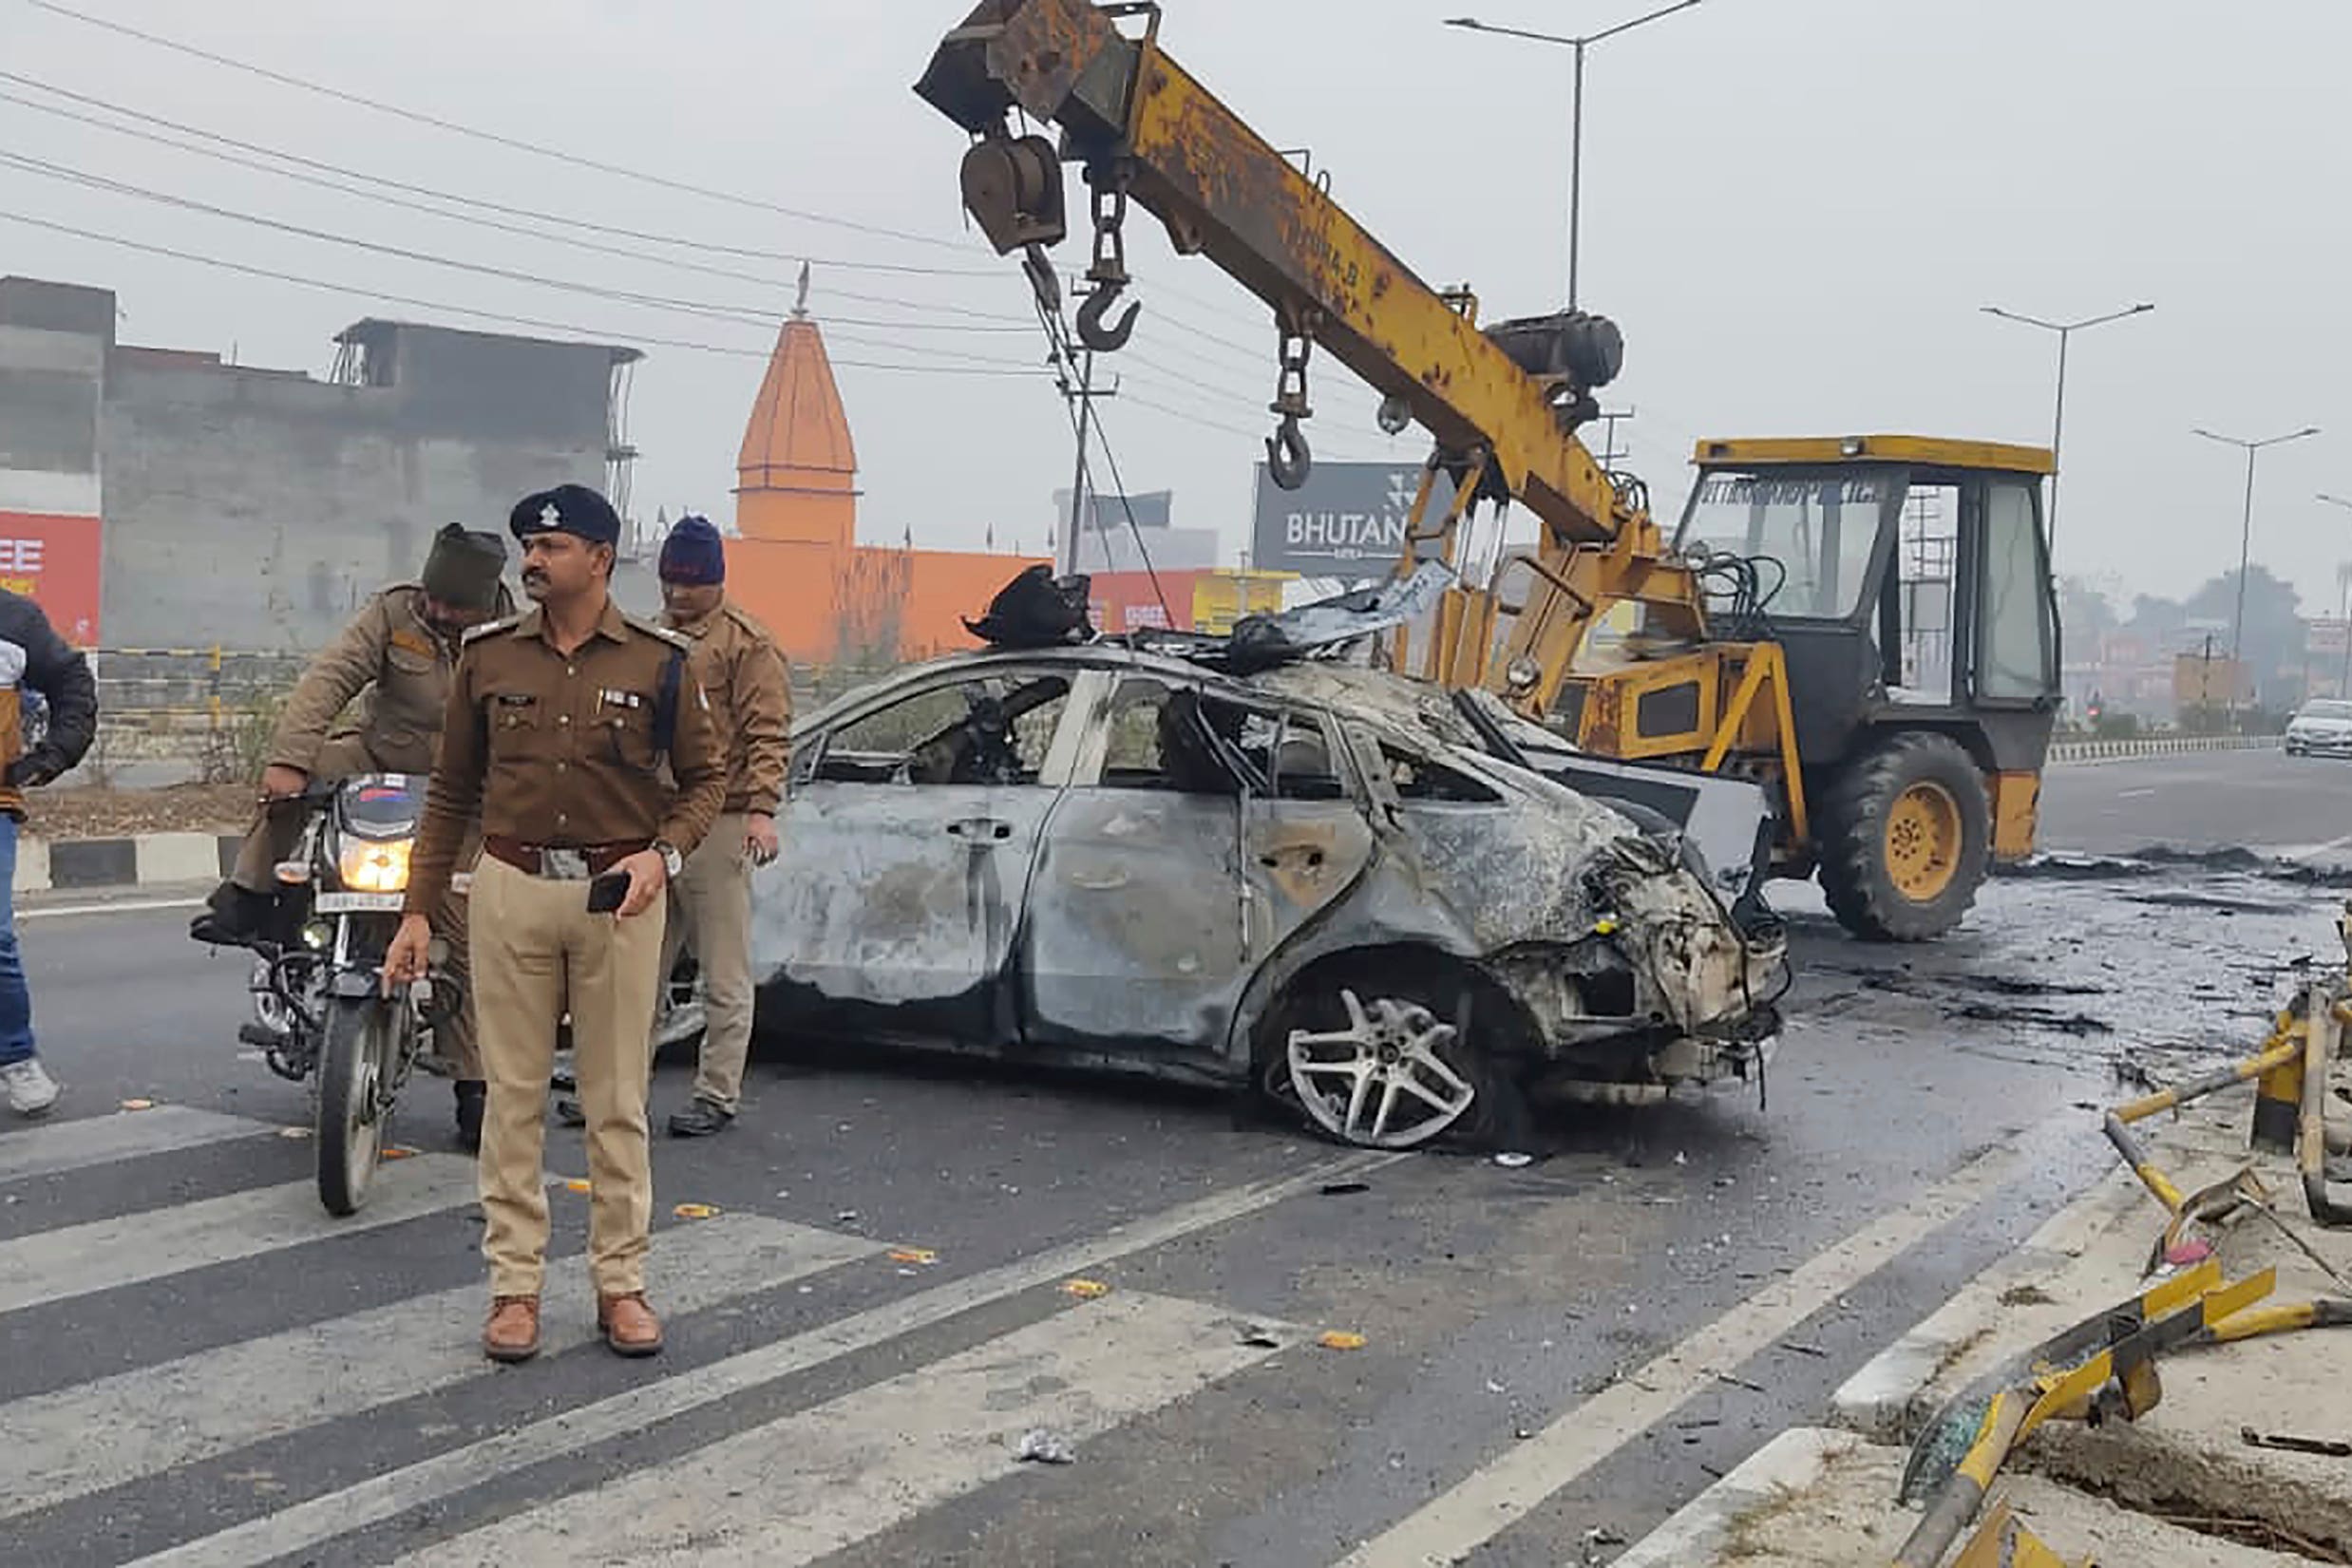 Indian wicketkeeper Pant was involved in a scary car accident on Friday